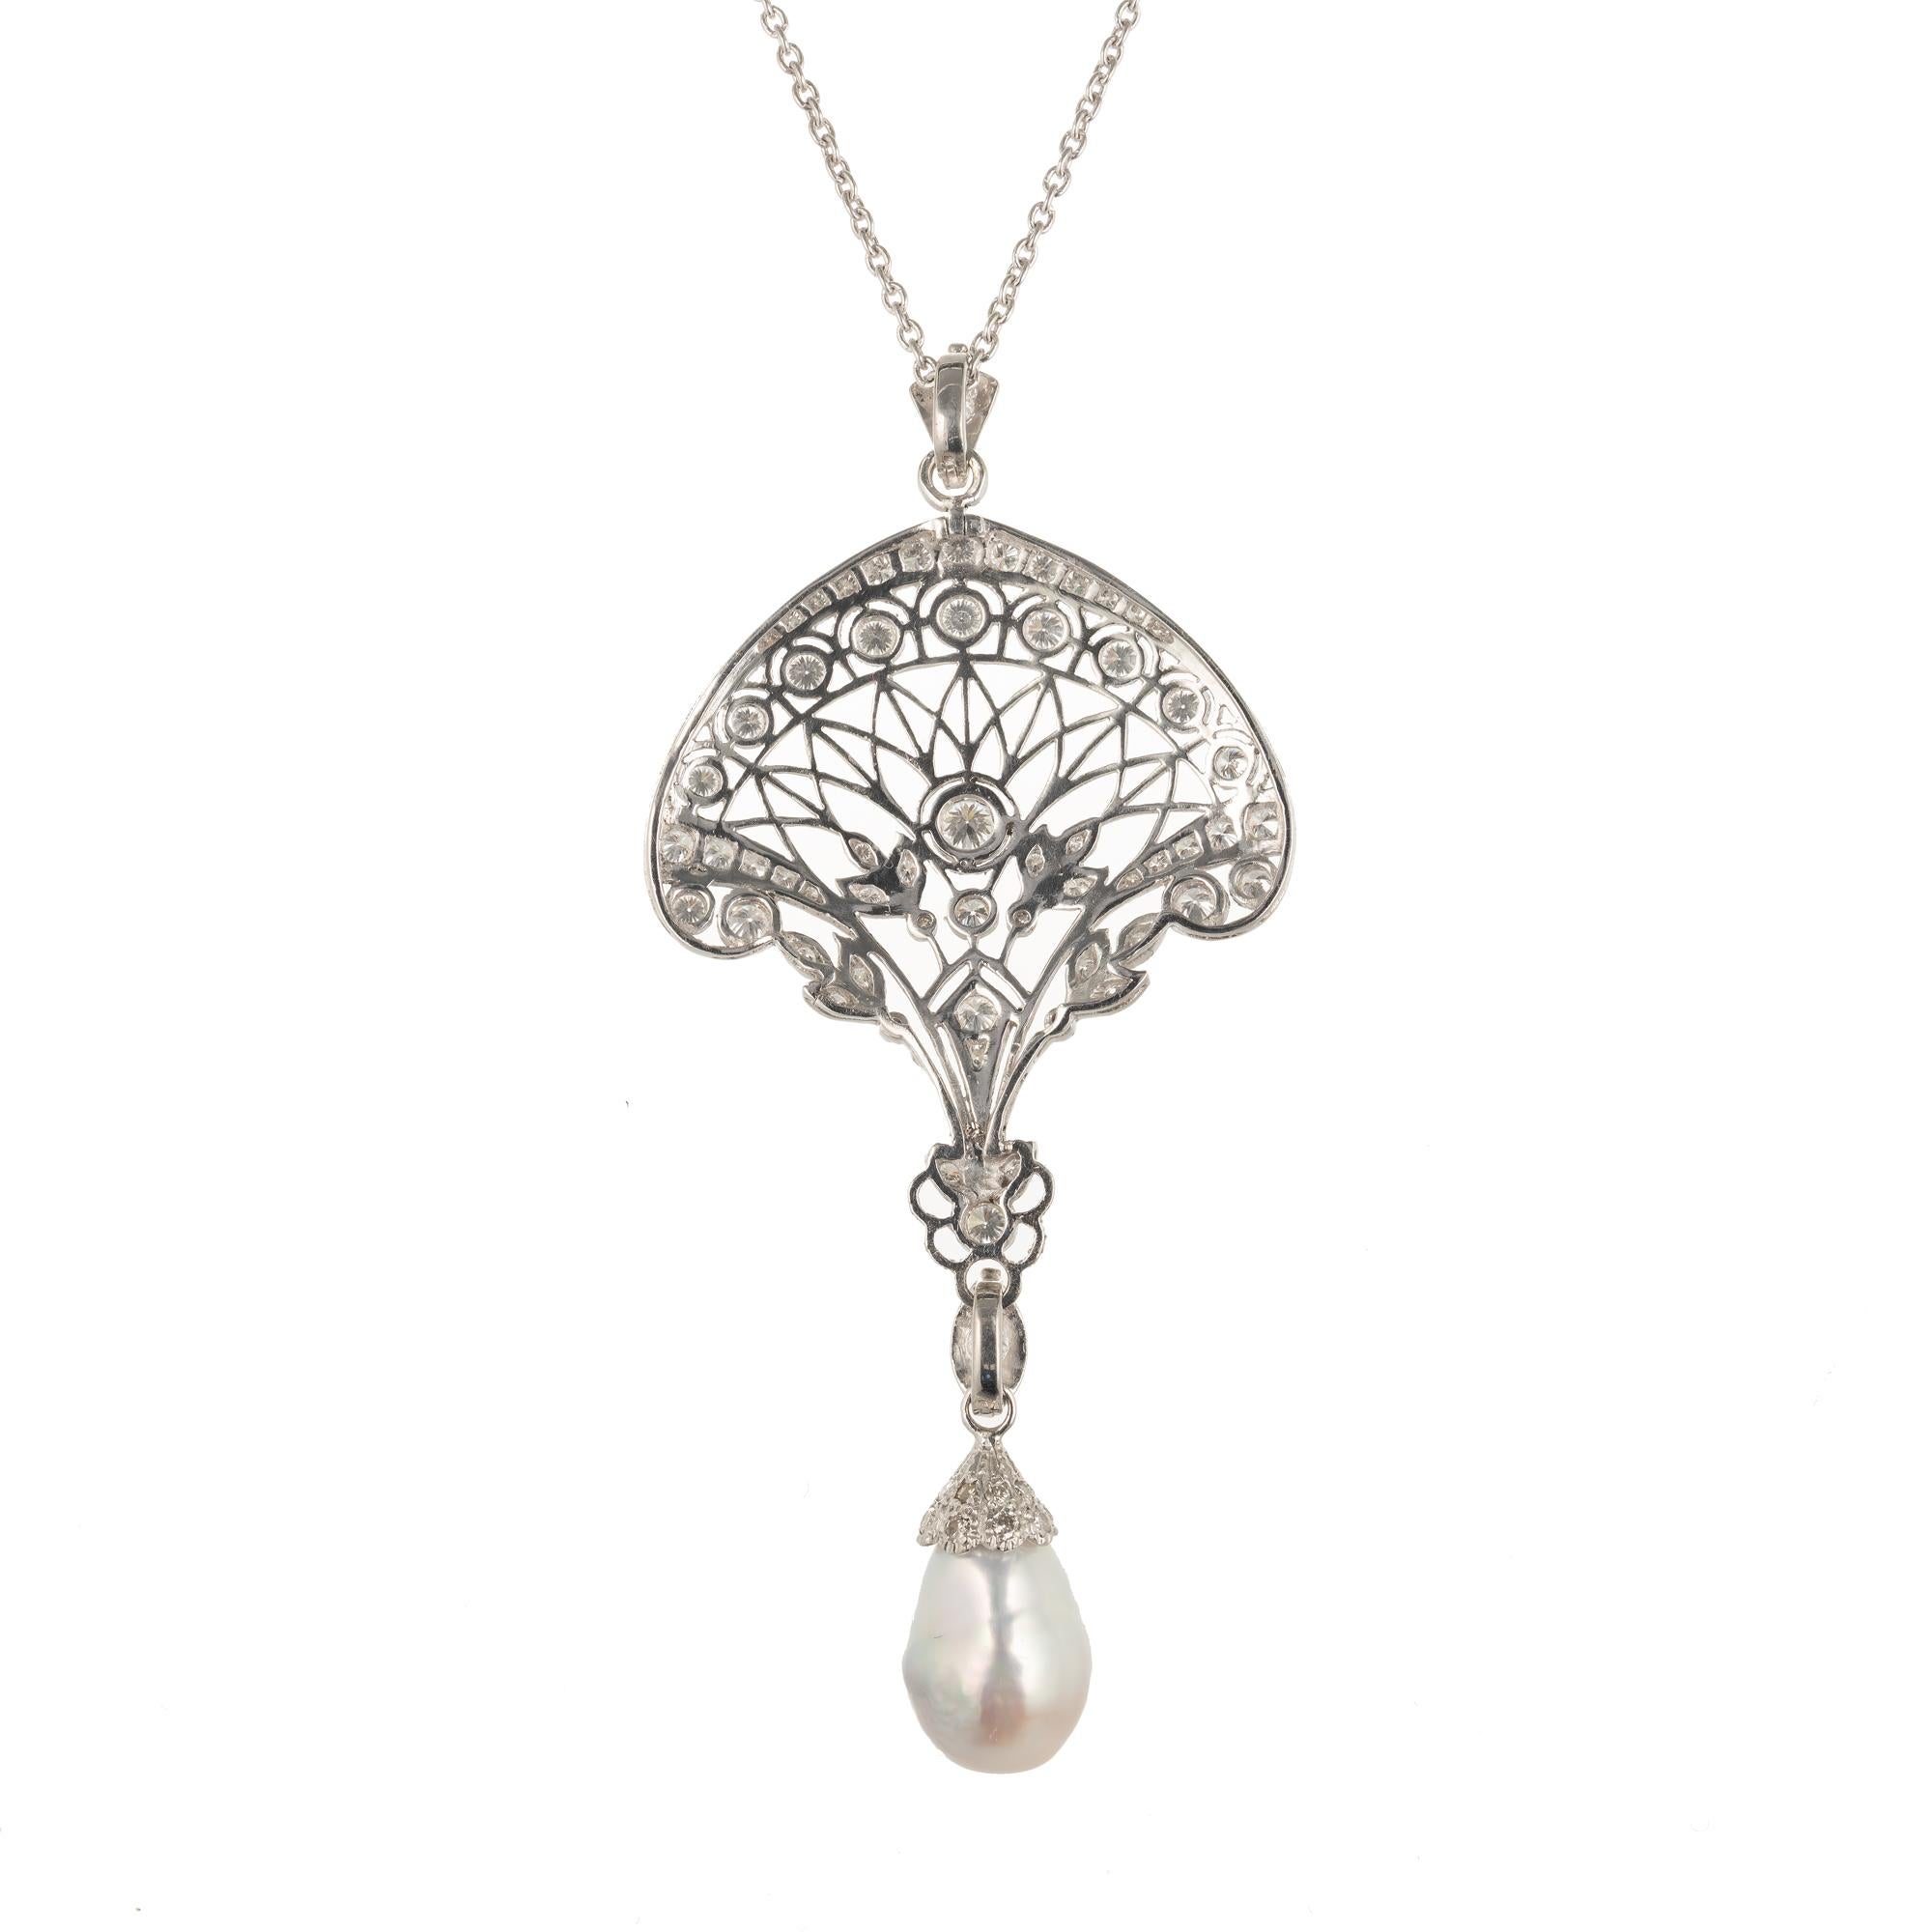 Edwardian Pearl and diamond open work pendant necklace. Platinum filigree pave set diamonds. Iridescent silvery South Sea semi-precious baroque pearl with rolling tints of both greenish blue and pink. The bail on the pearl opens. It can be removed